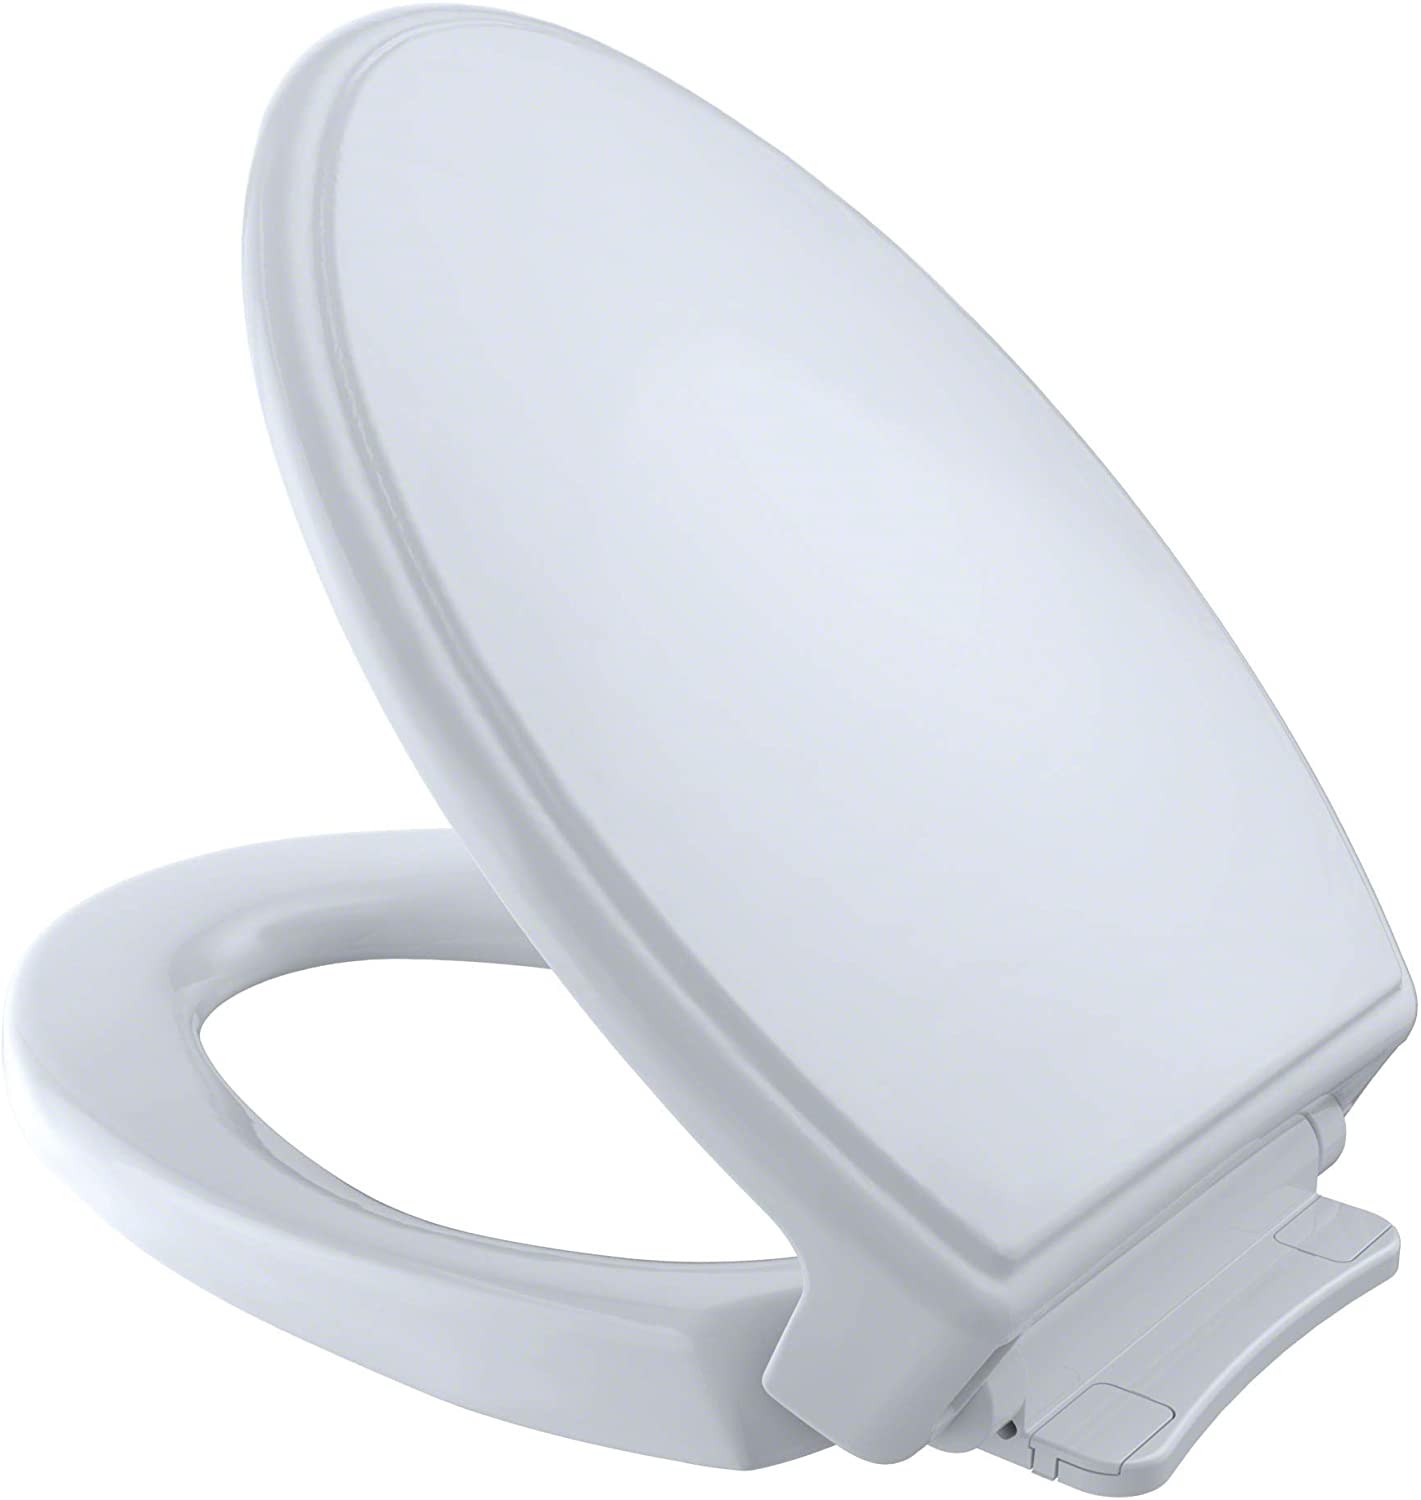 SS154#01 - Traditional SoftClose Elongated Toilet Seat - Cotton White